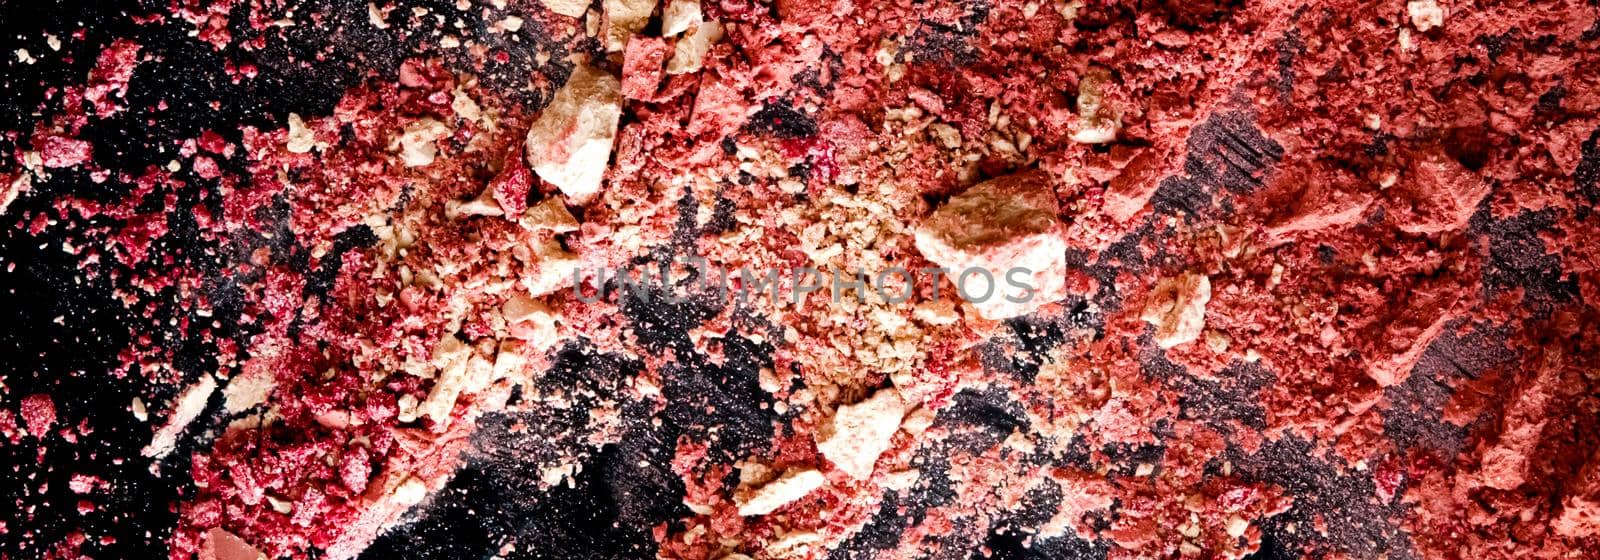 Crushed cosmetics, mineral organic eyeshadow, blush and cosmetic powder isolated on black background, makeup and beauty banner, flatlay design by Anneleven